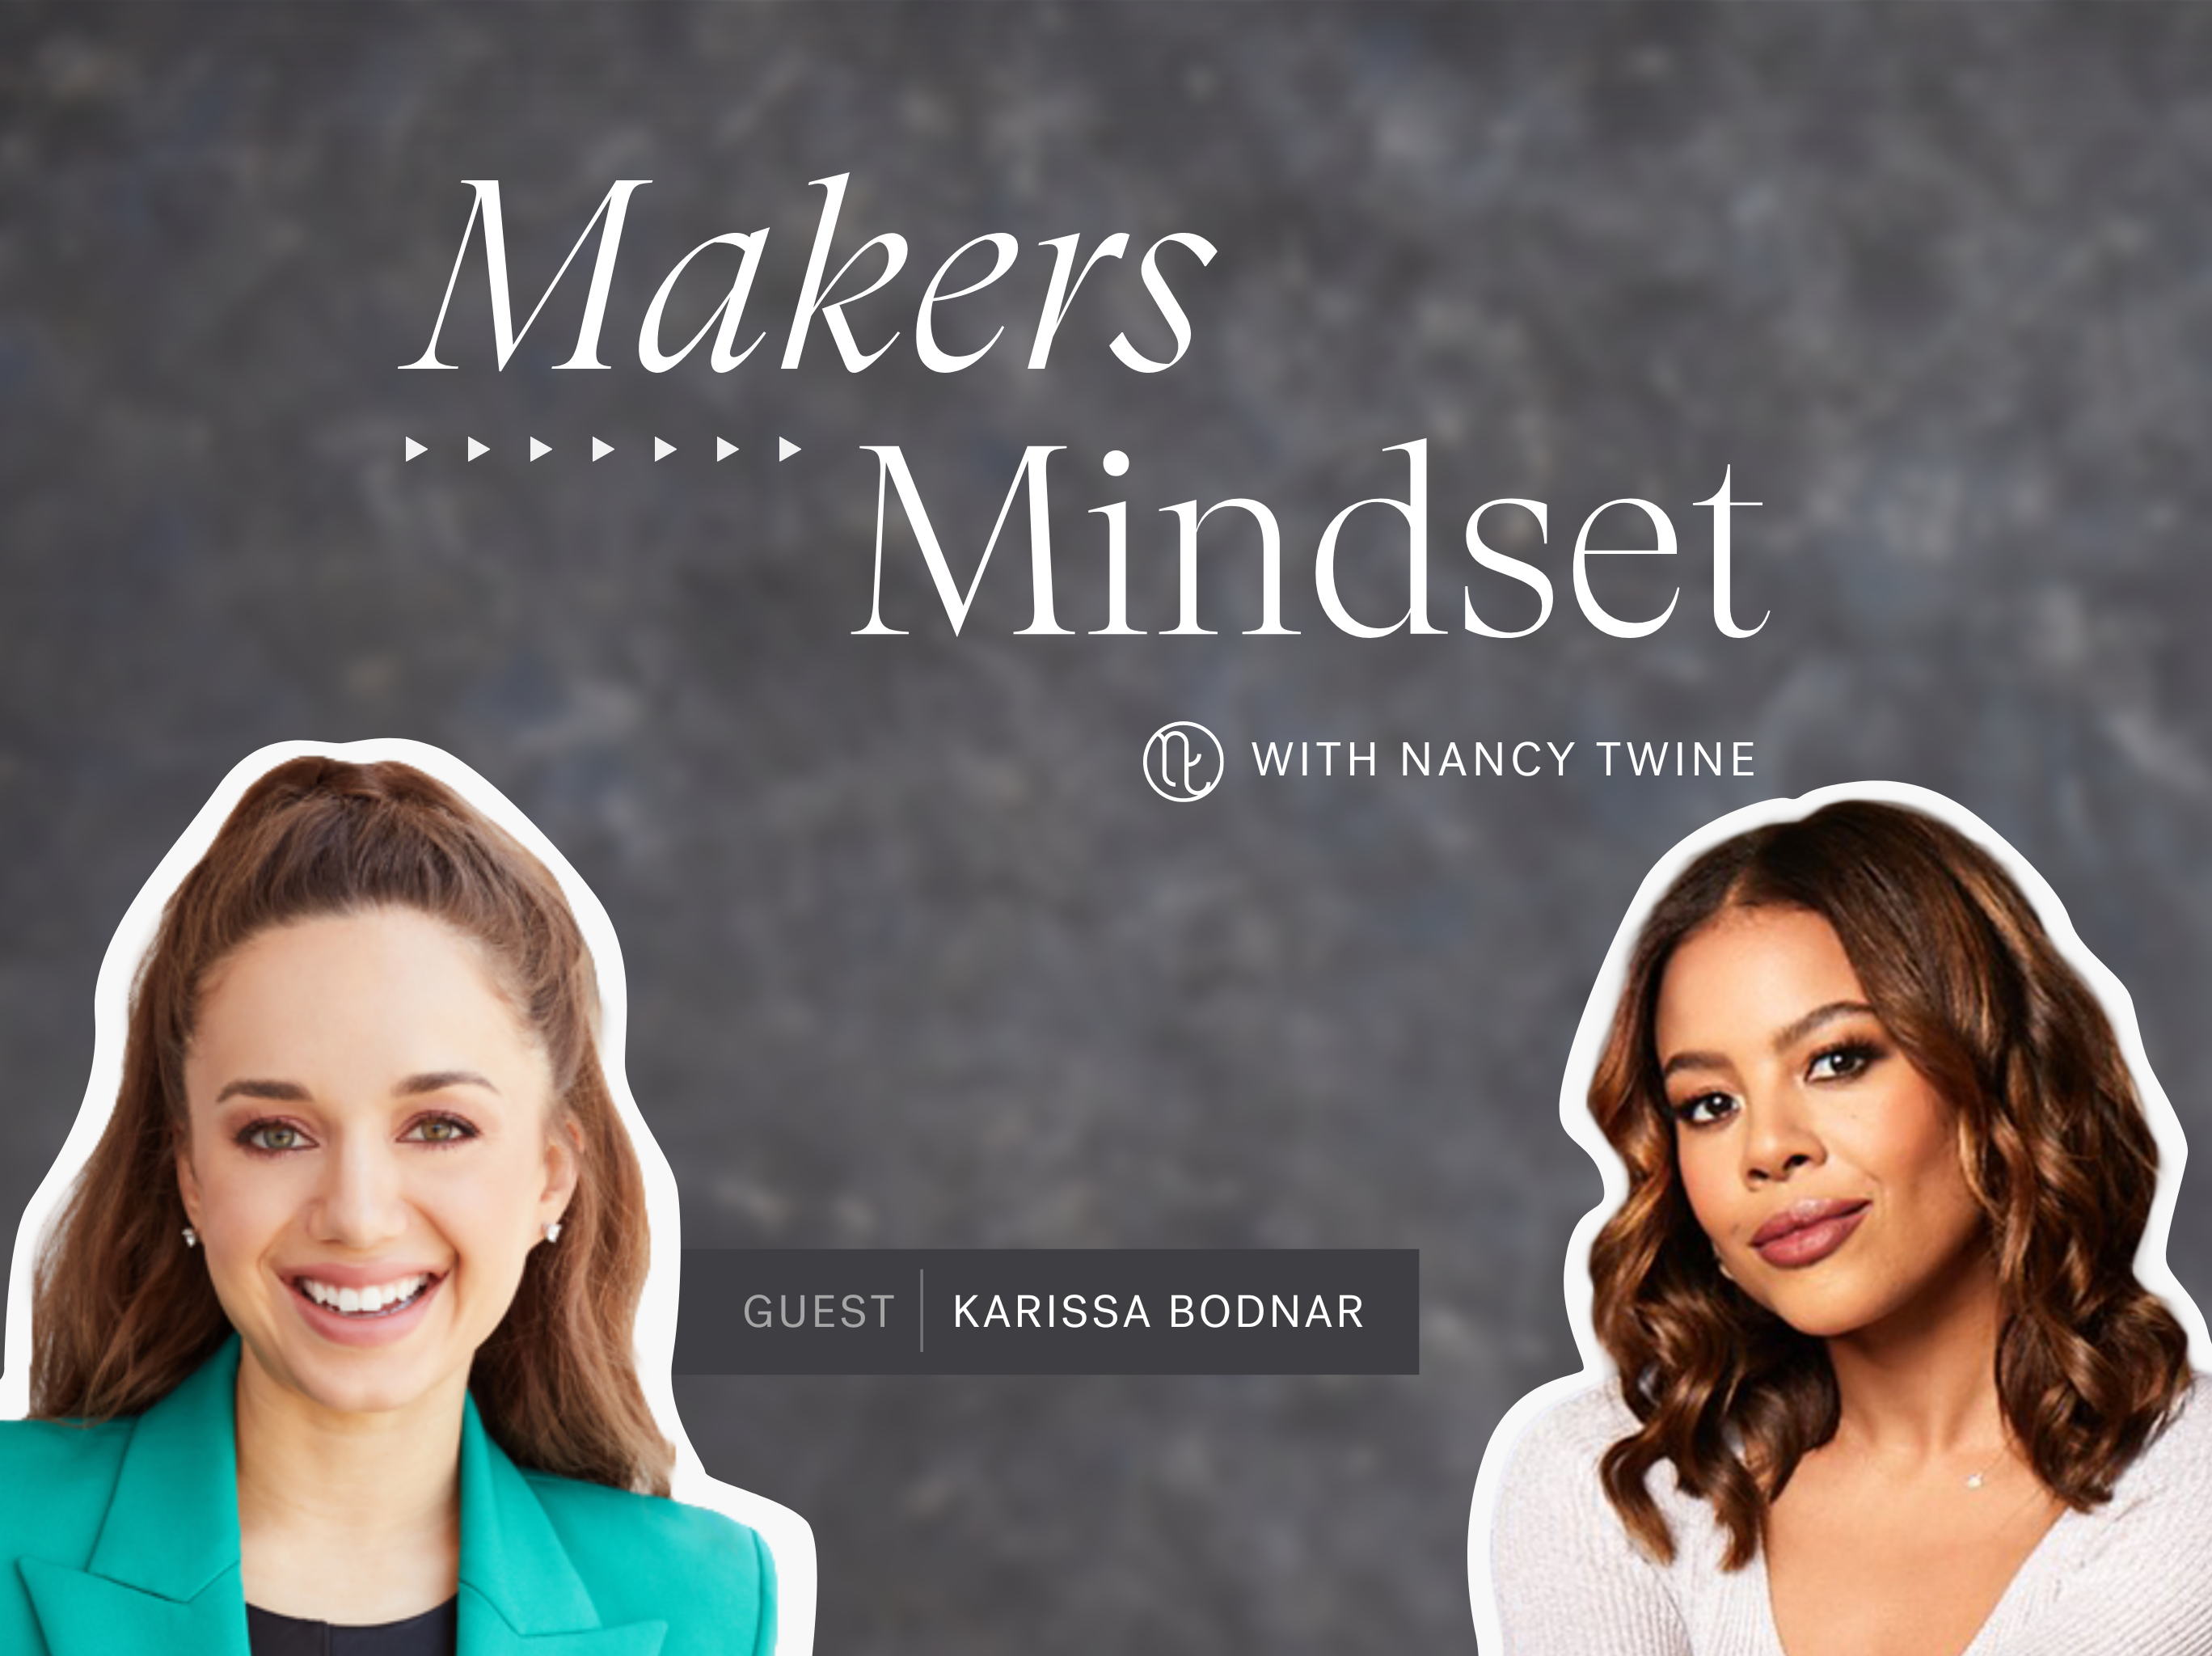 A cover image for the Makers Mindset podcast featuring Karissa Bodnar, Founder and CEO of Thrive Causemetics and Bigger Than Beauty Skincare (left) with host Nancy Twine (right).